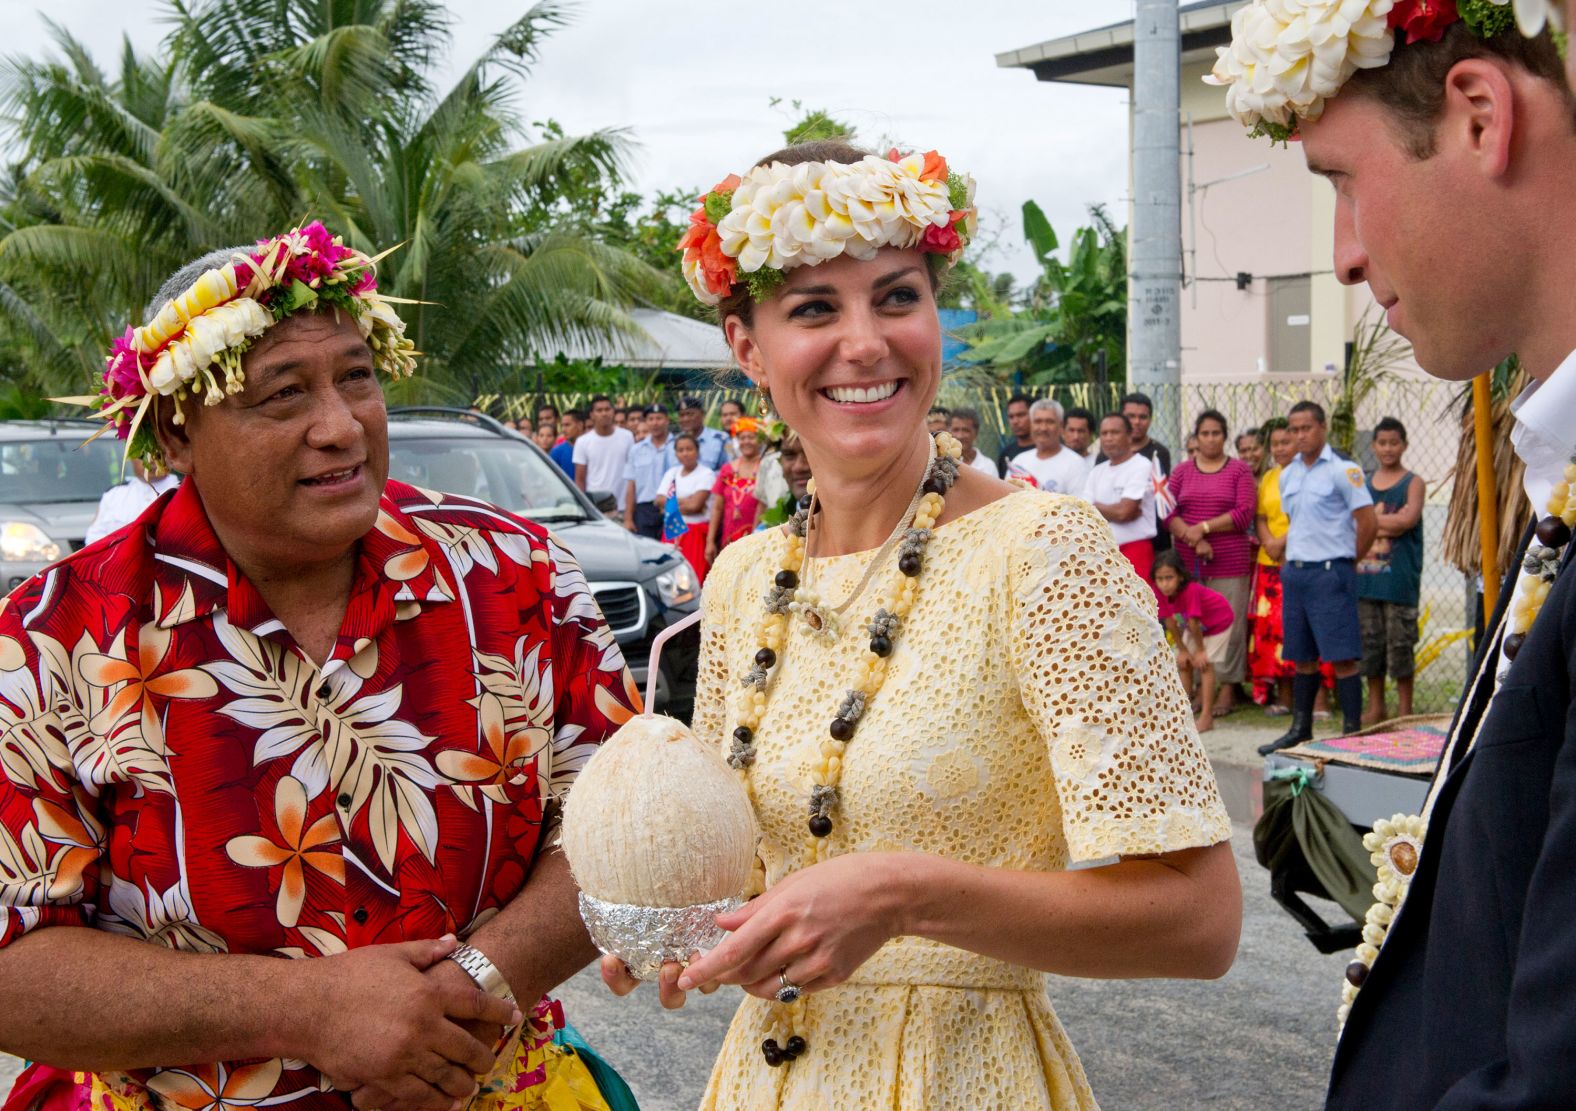 In 2012, Kate and William drink coconut milk from a tree that Queen Elizabeth II planted decades ago in the South Pacific nation of Tuvalu.